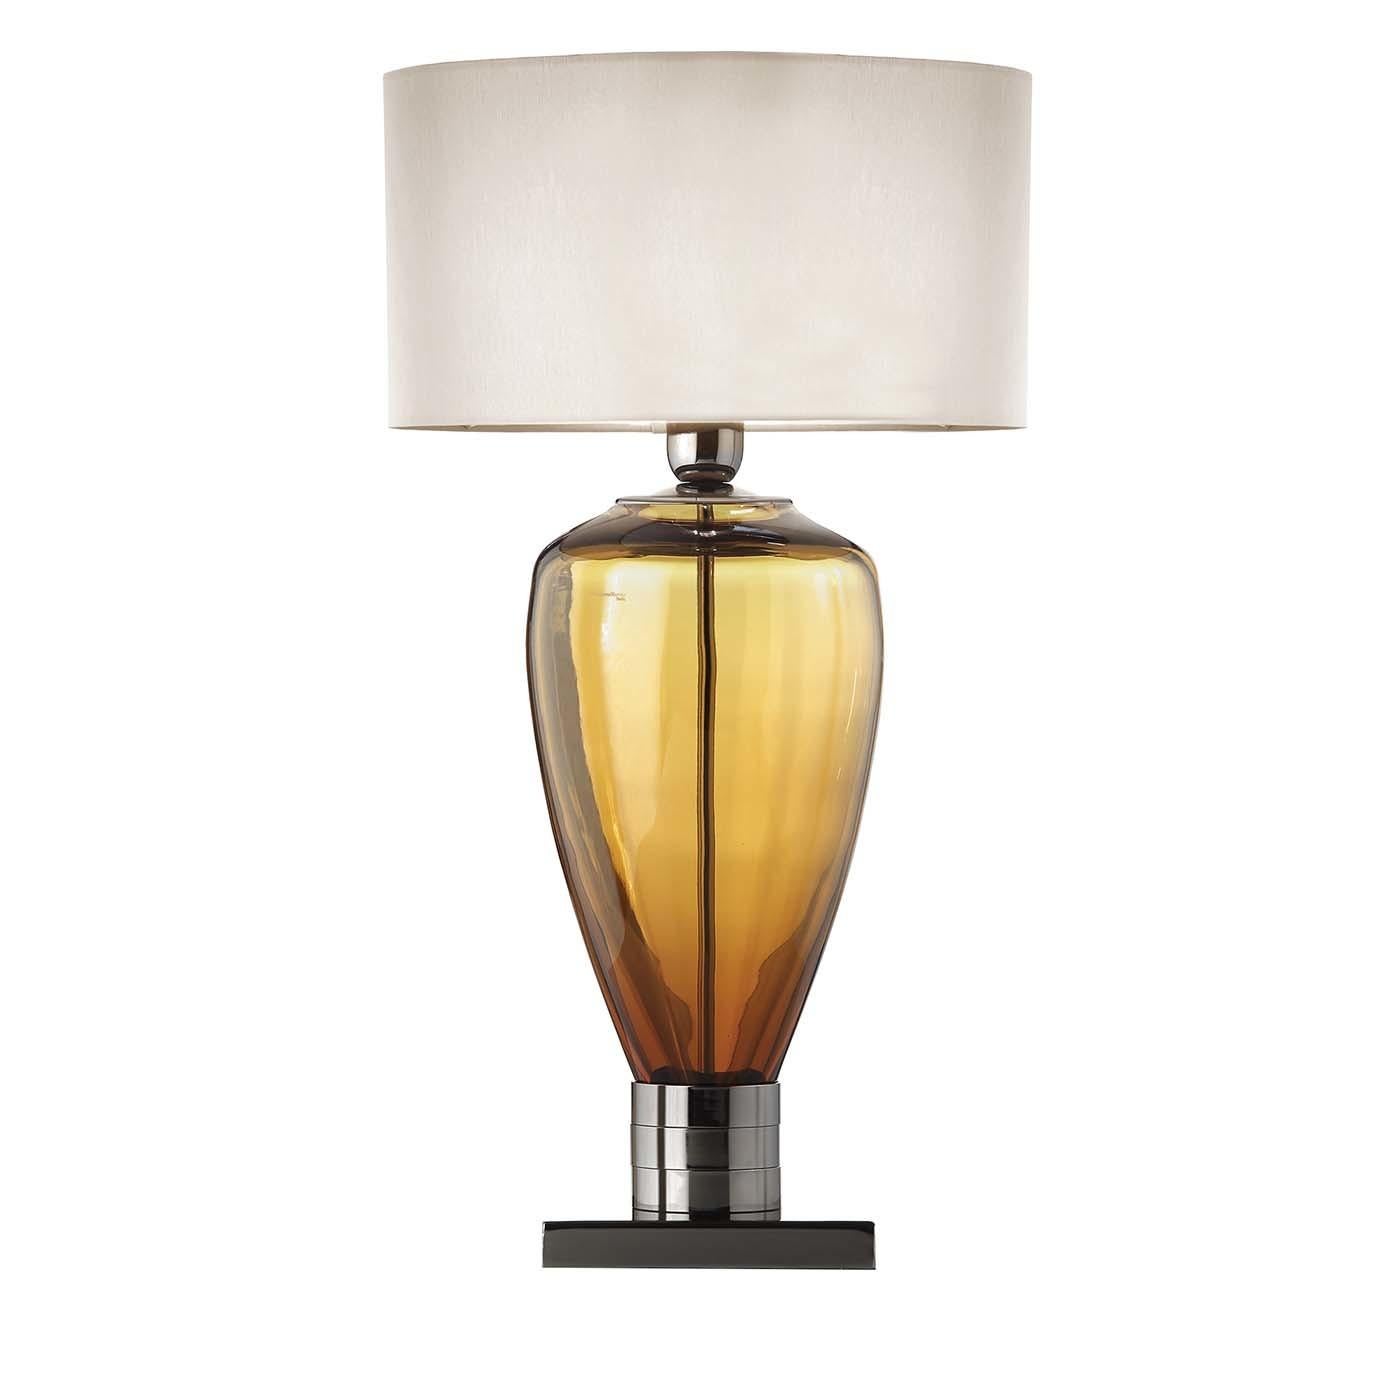 This stunning table lamp is the amber-hued version of the grey table lamp and can either be displayed as a pair for a dynamic effect or alone to add a sophisticated ambiance to a contemporary decor. The structure is a sinuous silhouette in 24 lead